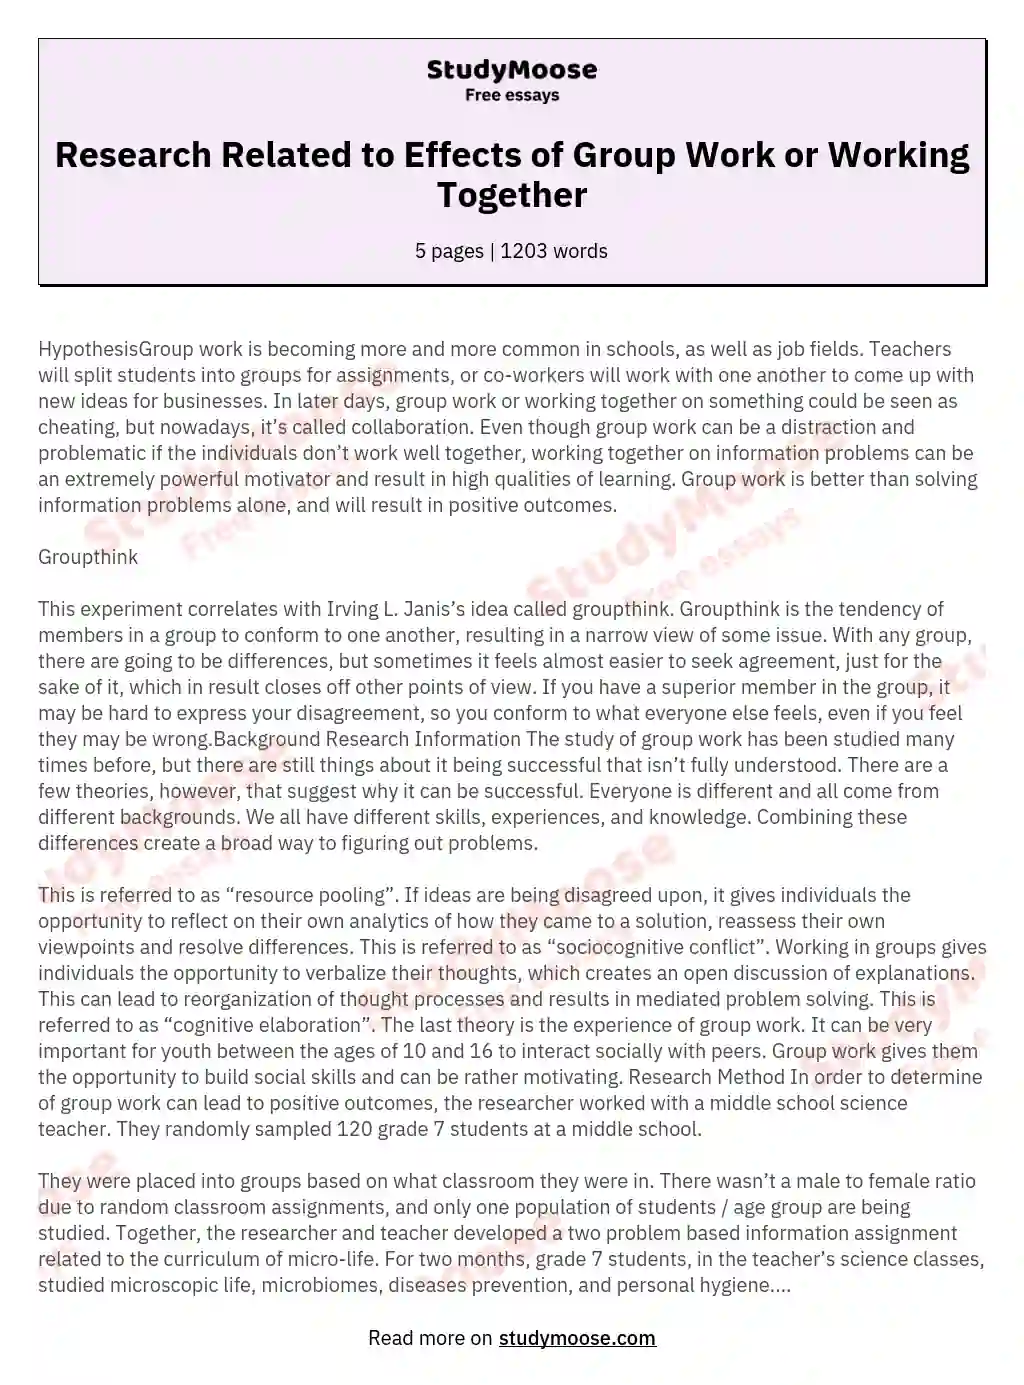 Research Related to Effects of Group Work or Working Together essay